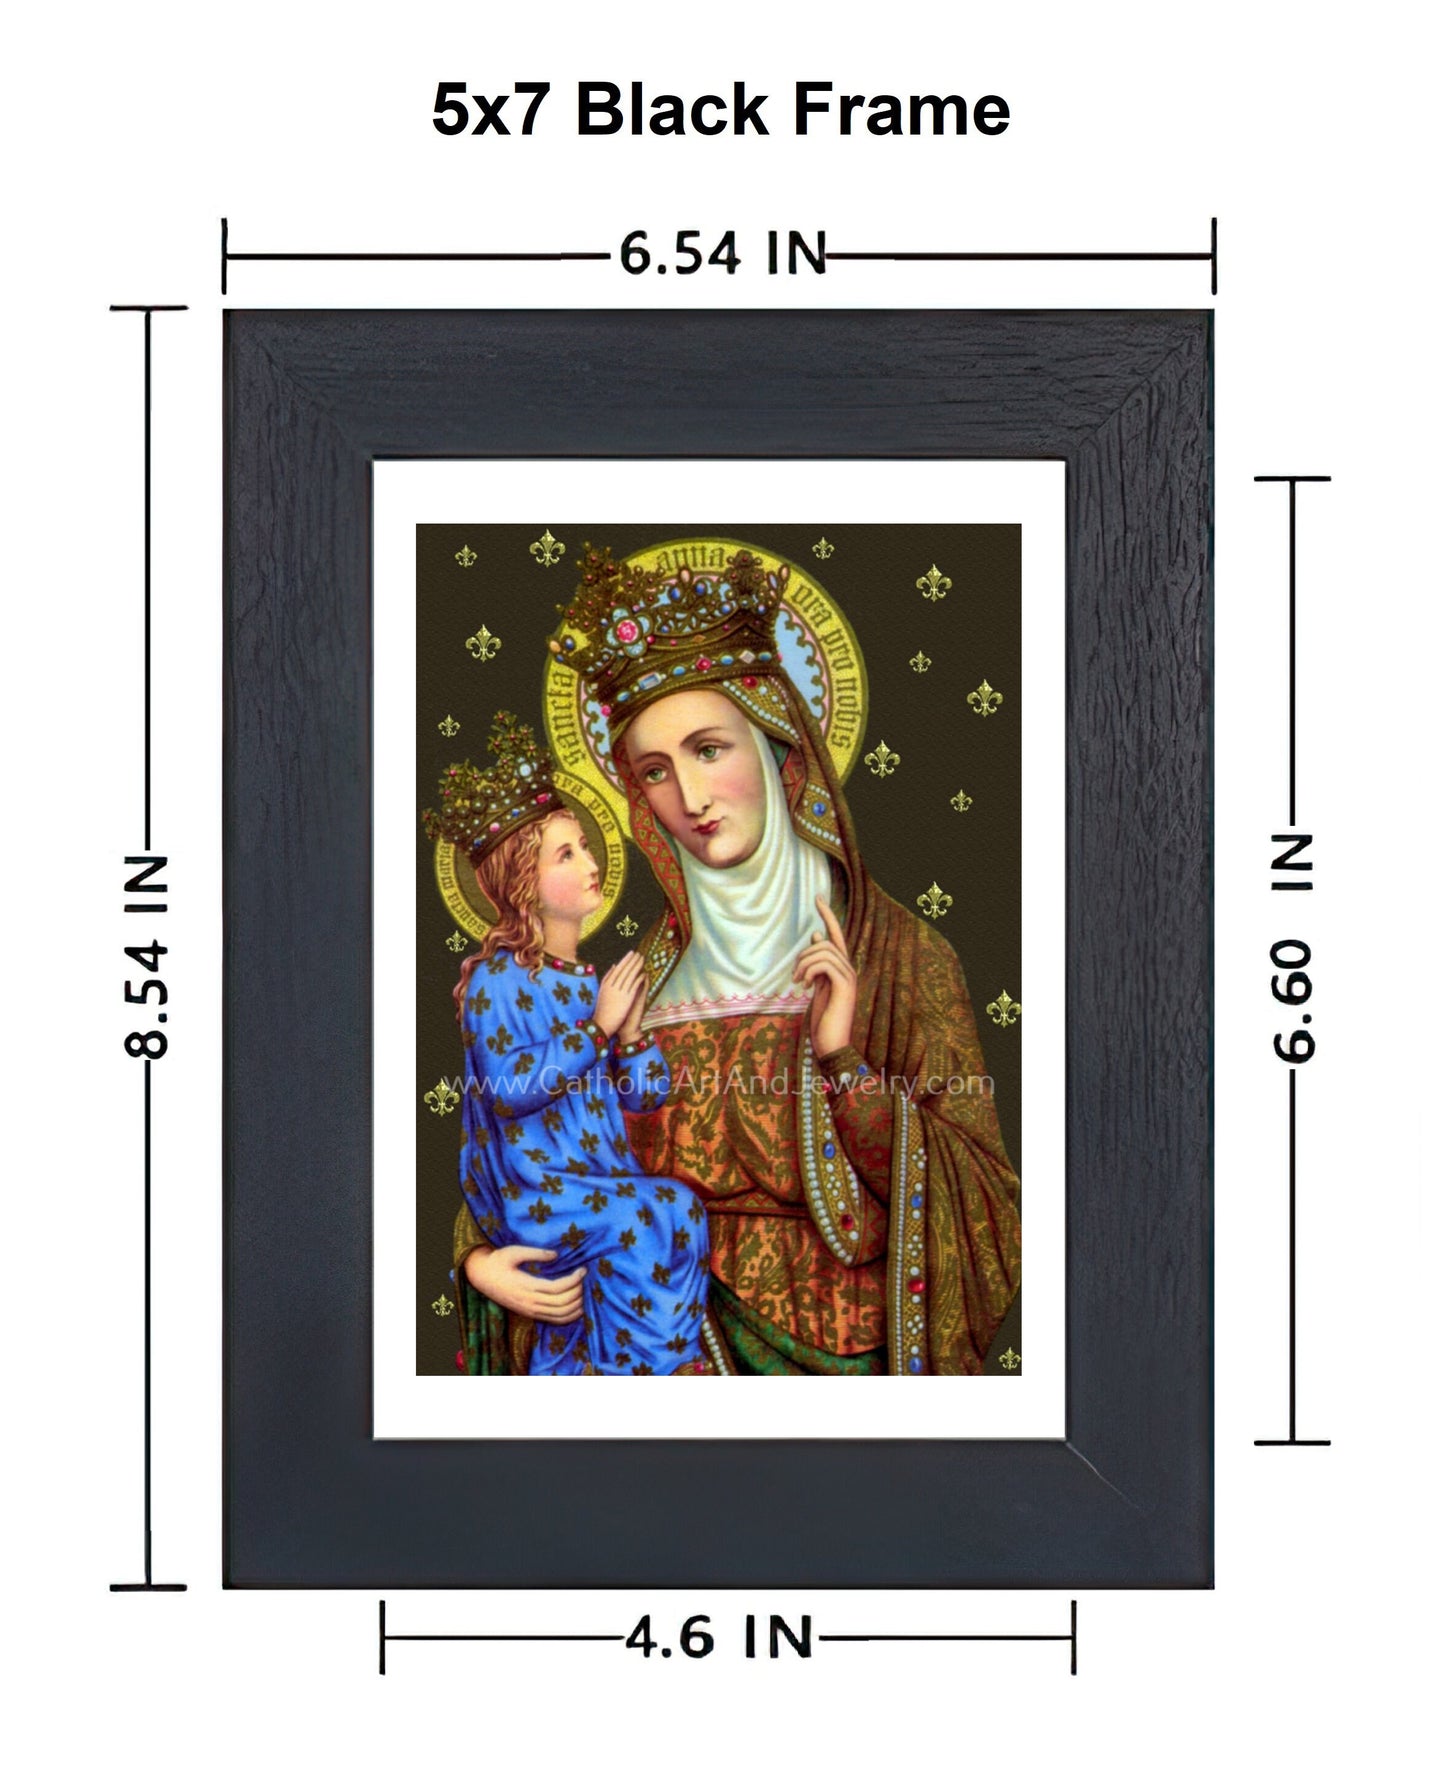 Saint Anne DeBupre – Saint Anne with Mary – Patron of Housewives, Mothers and Grandmothers – Archival Print – Catholic Art